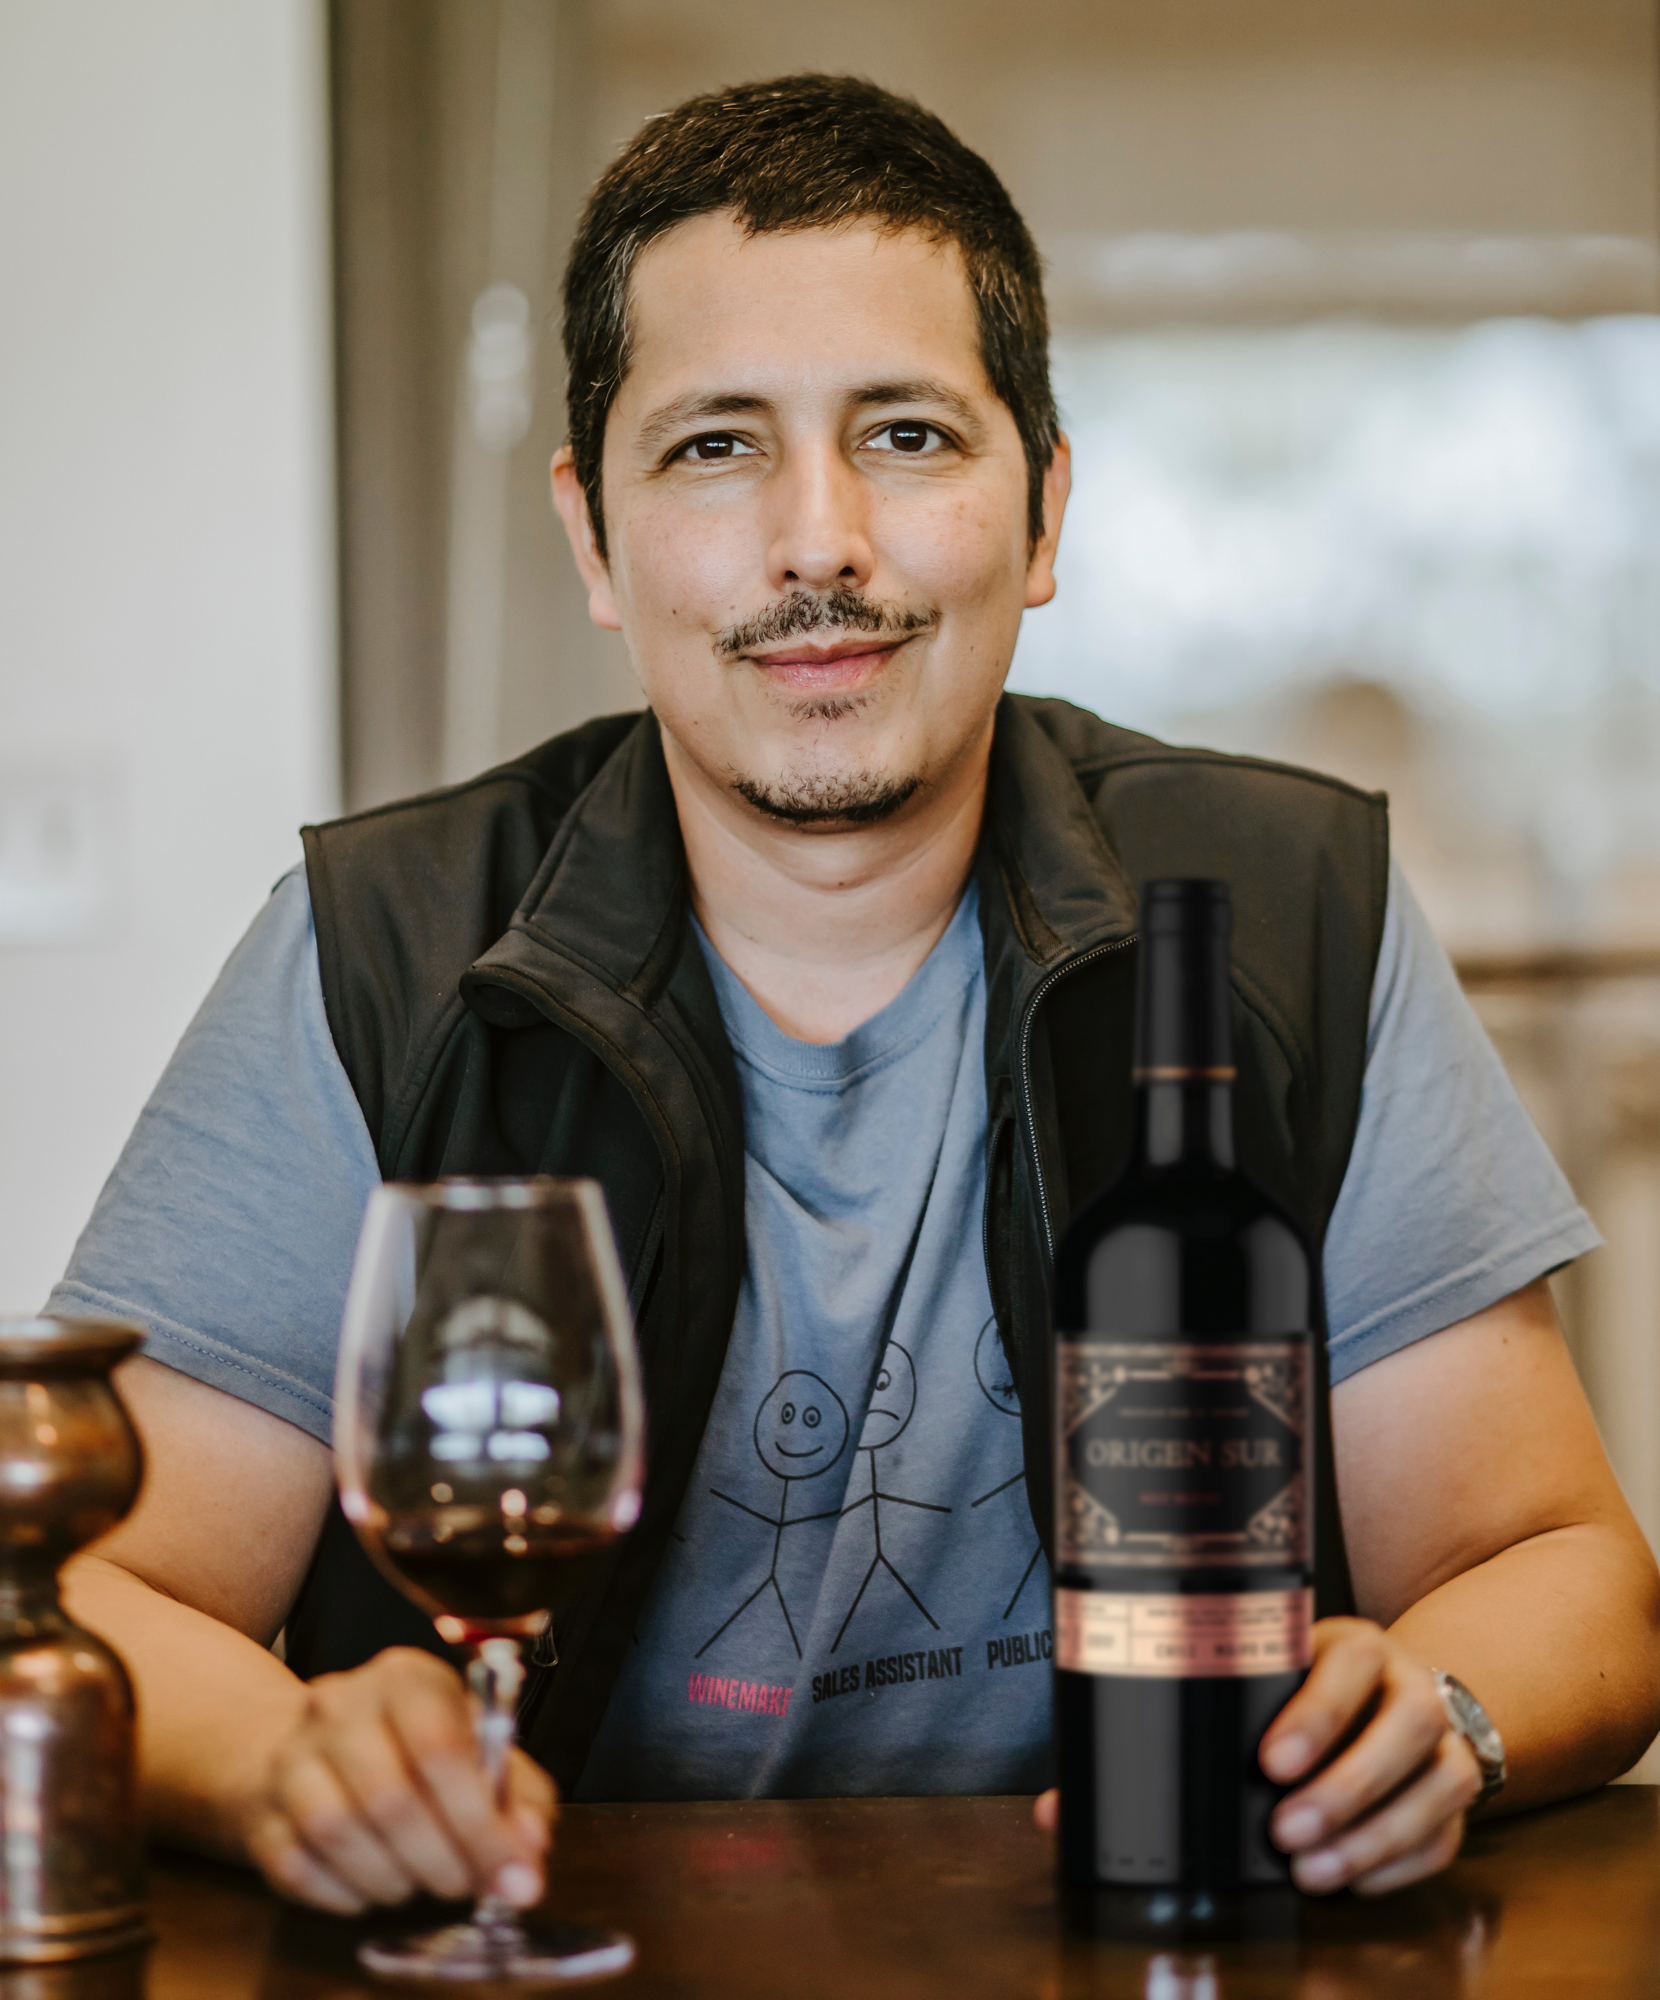 Martin Reyes Perfects His Red Blend with Coravin Screw Caps